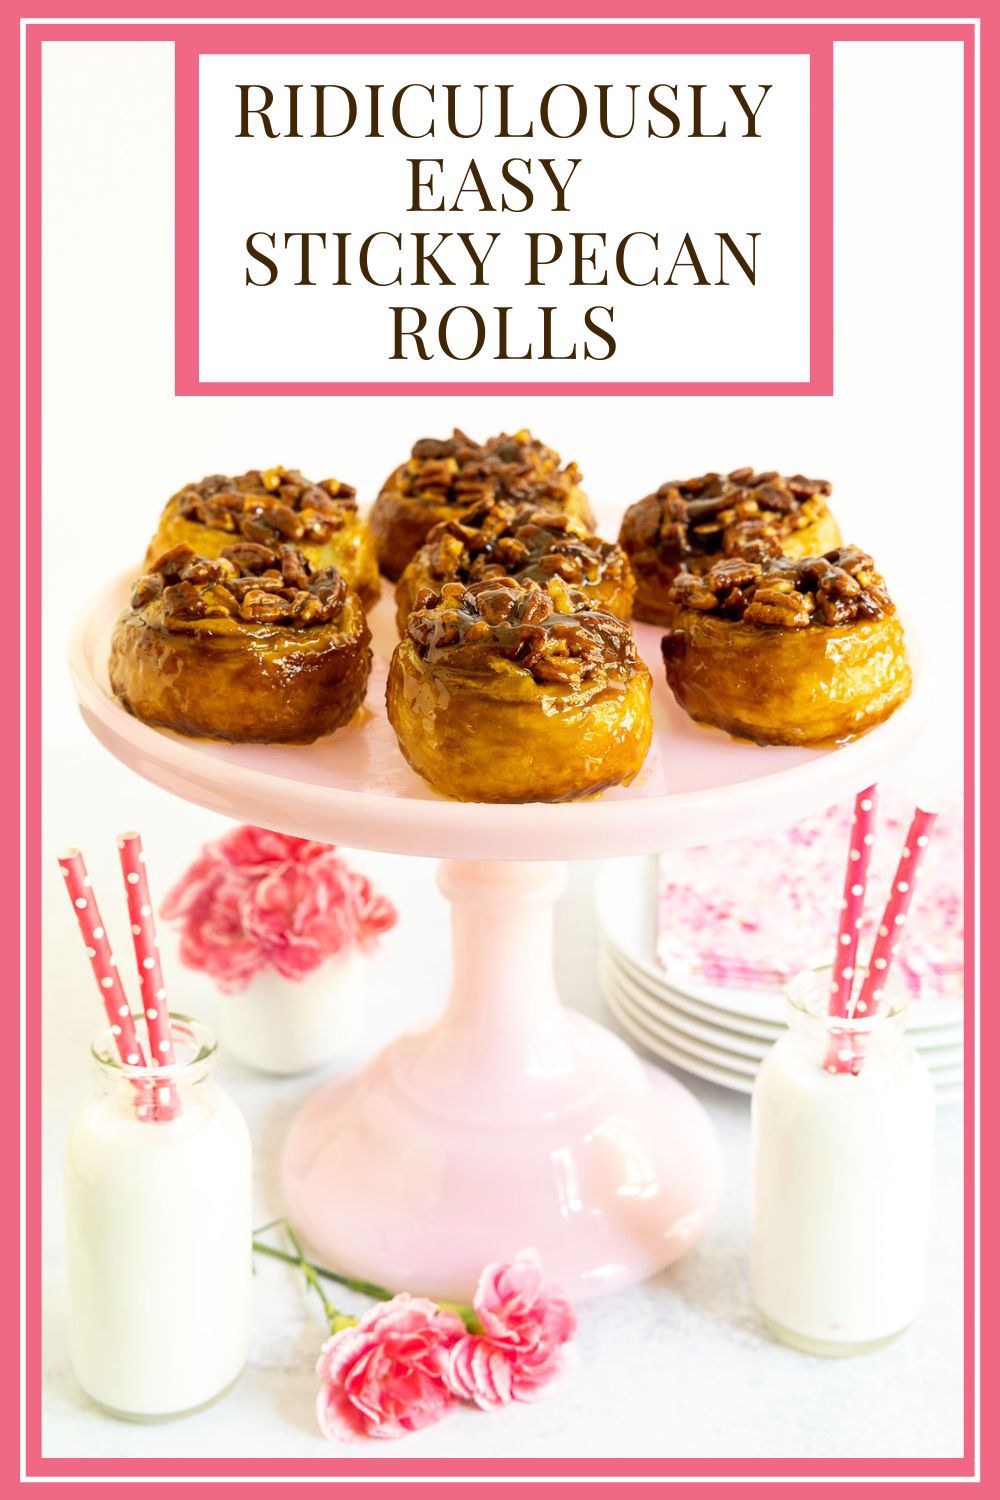 Ridiculously Easy Sticky Pecan Rolls